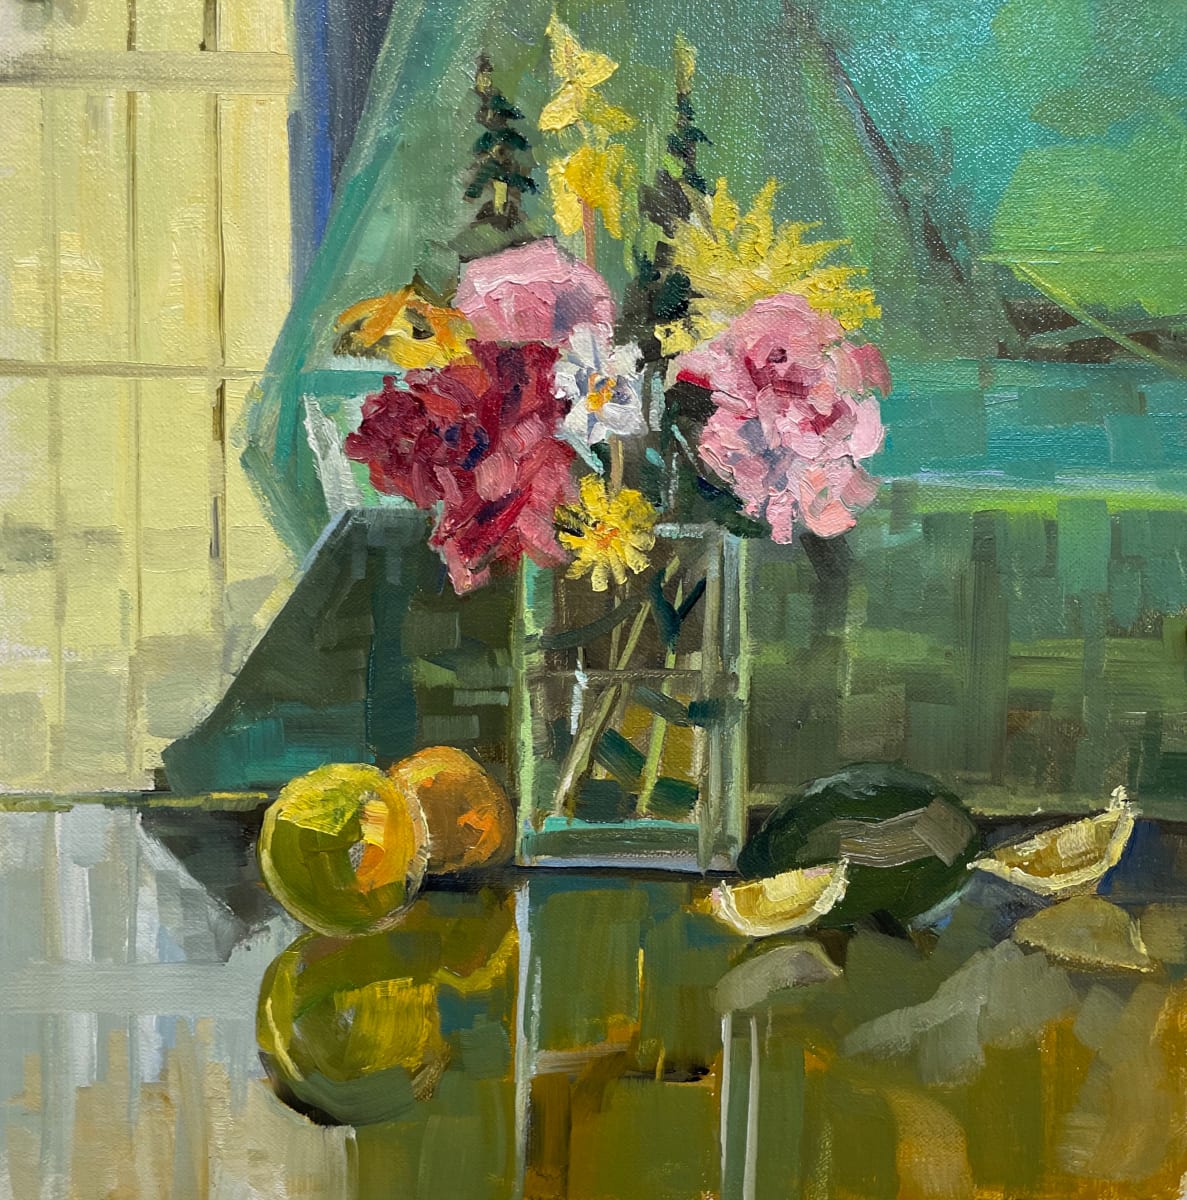 Flowers & Fruit by the Window by Elaine Lisle 